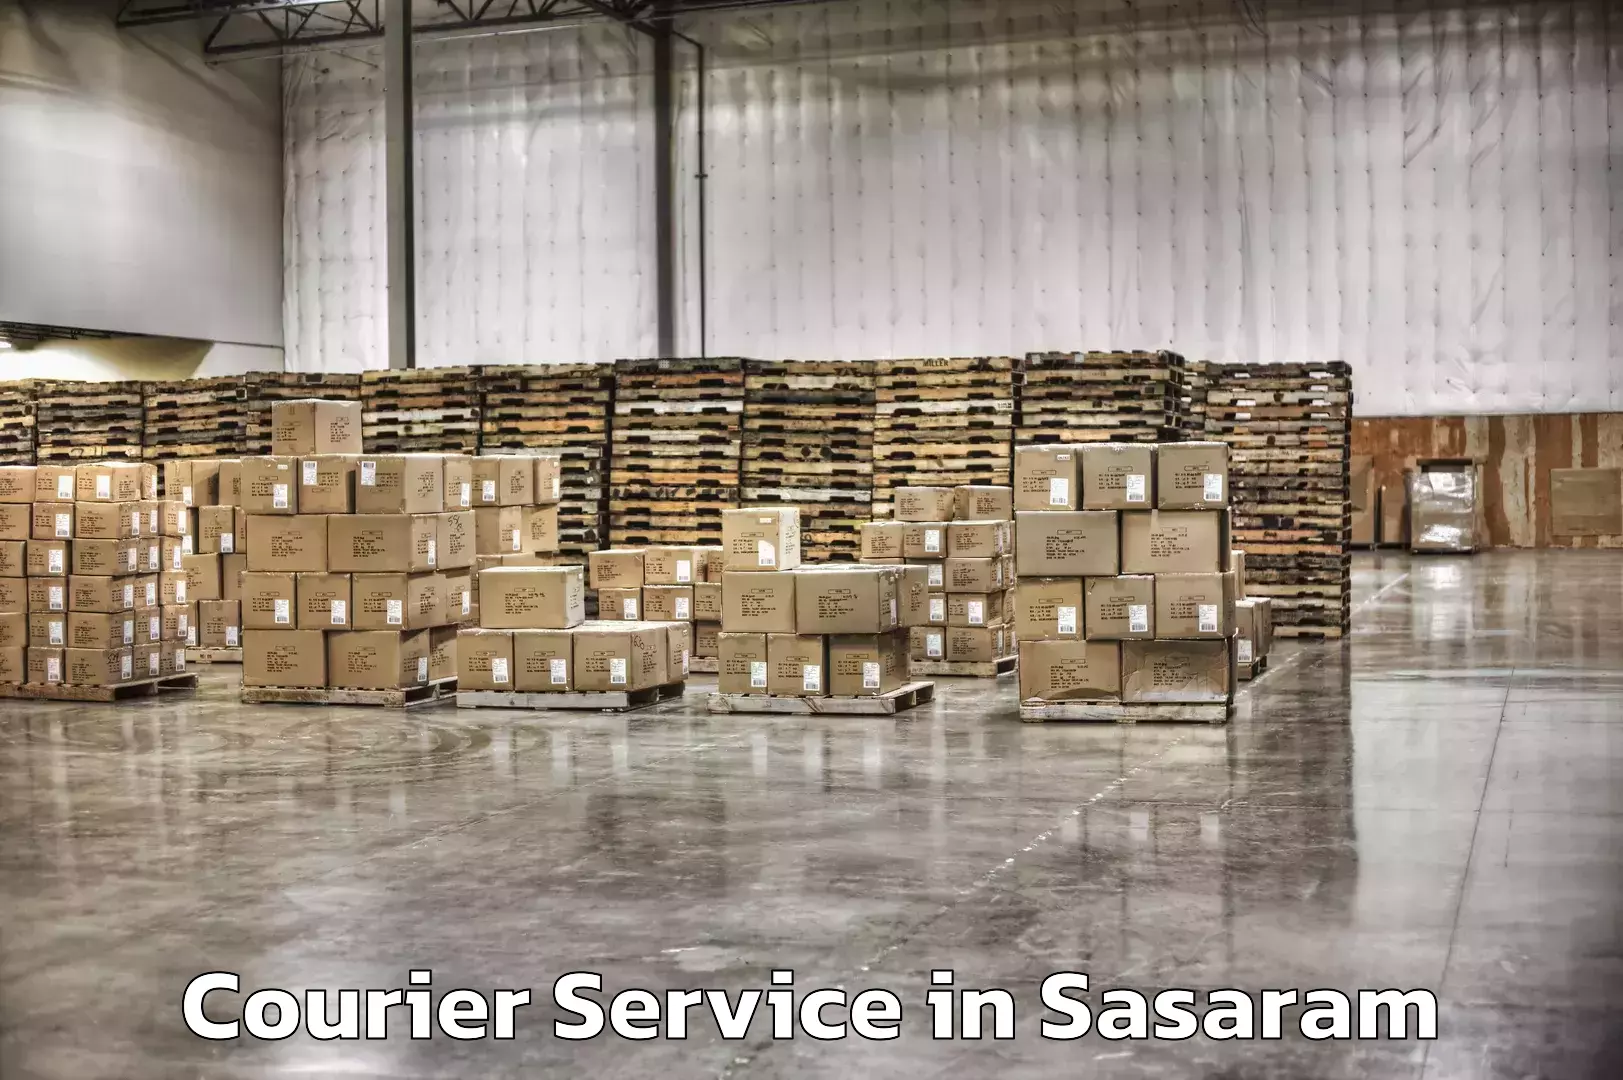 Courier service efficiency in Sasaram